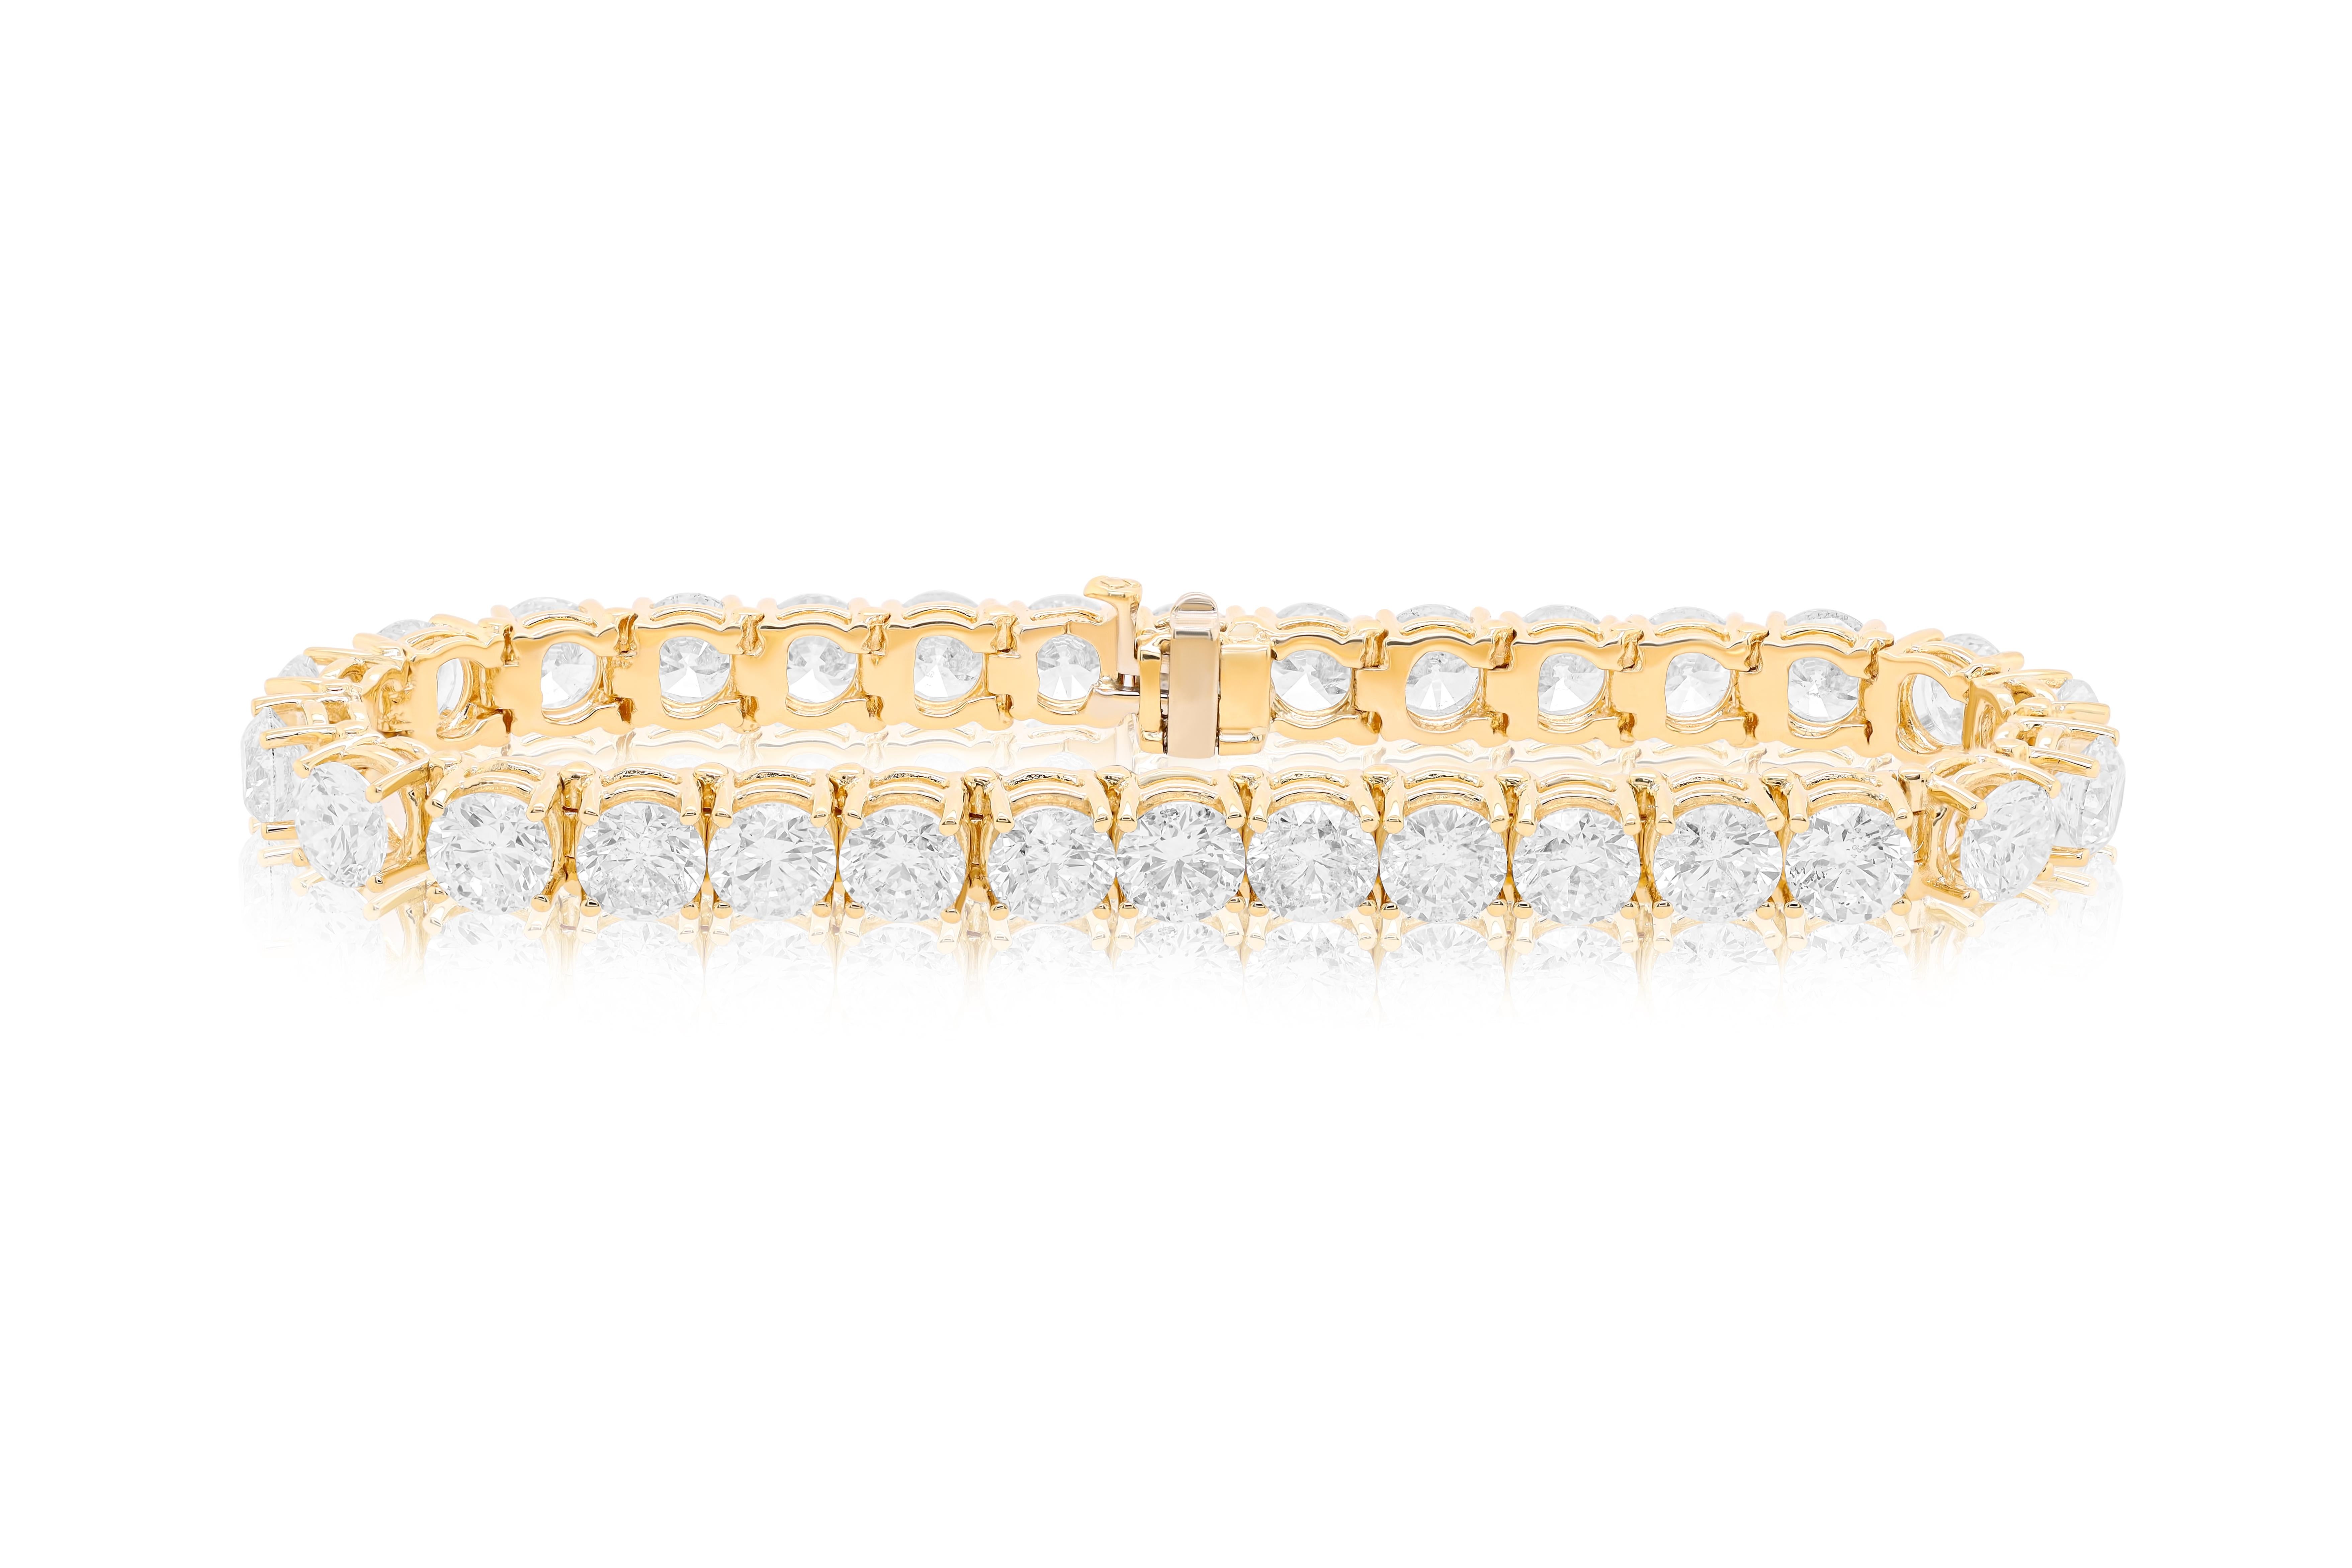 Custom 18 kt yellow gold 4 prong diamond tennis bracelet 21.35 cts of round diamonds 30 stones 0.71  each stone FG color SI clarity.  Excellent Cut.